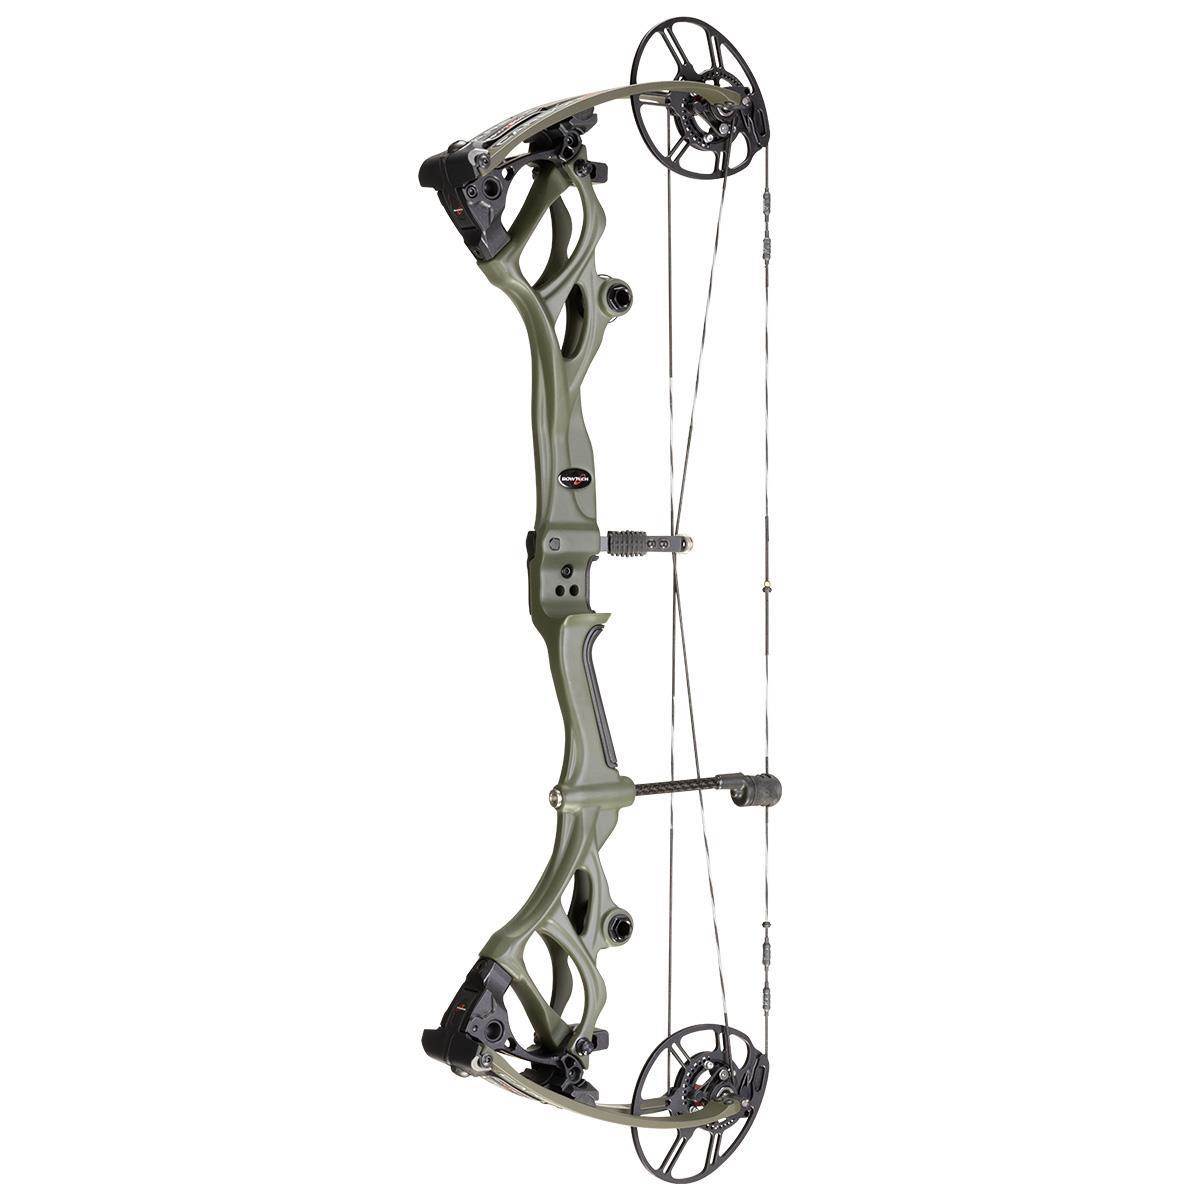  Archery Equipment and Bow Hunting Supplies